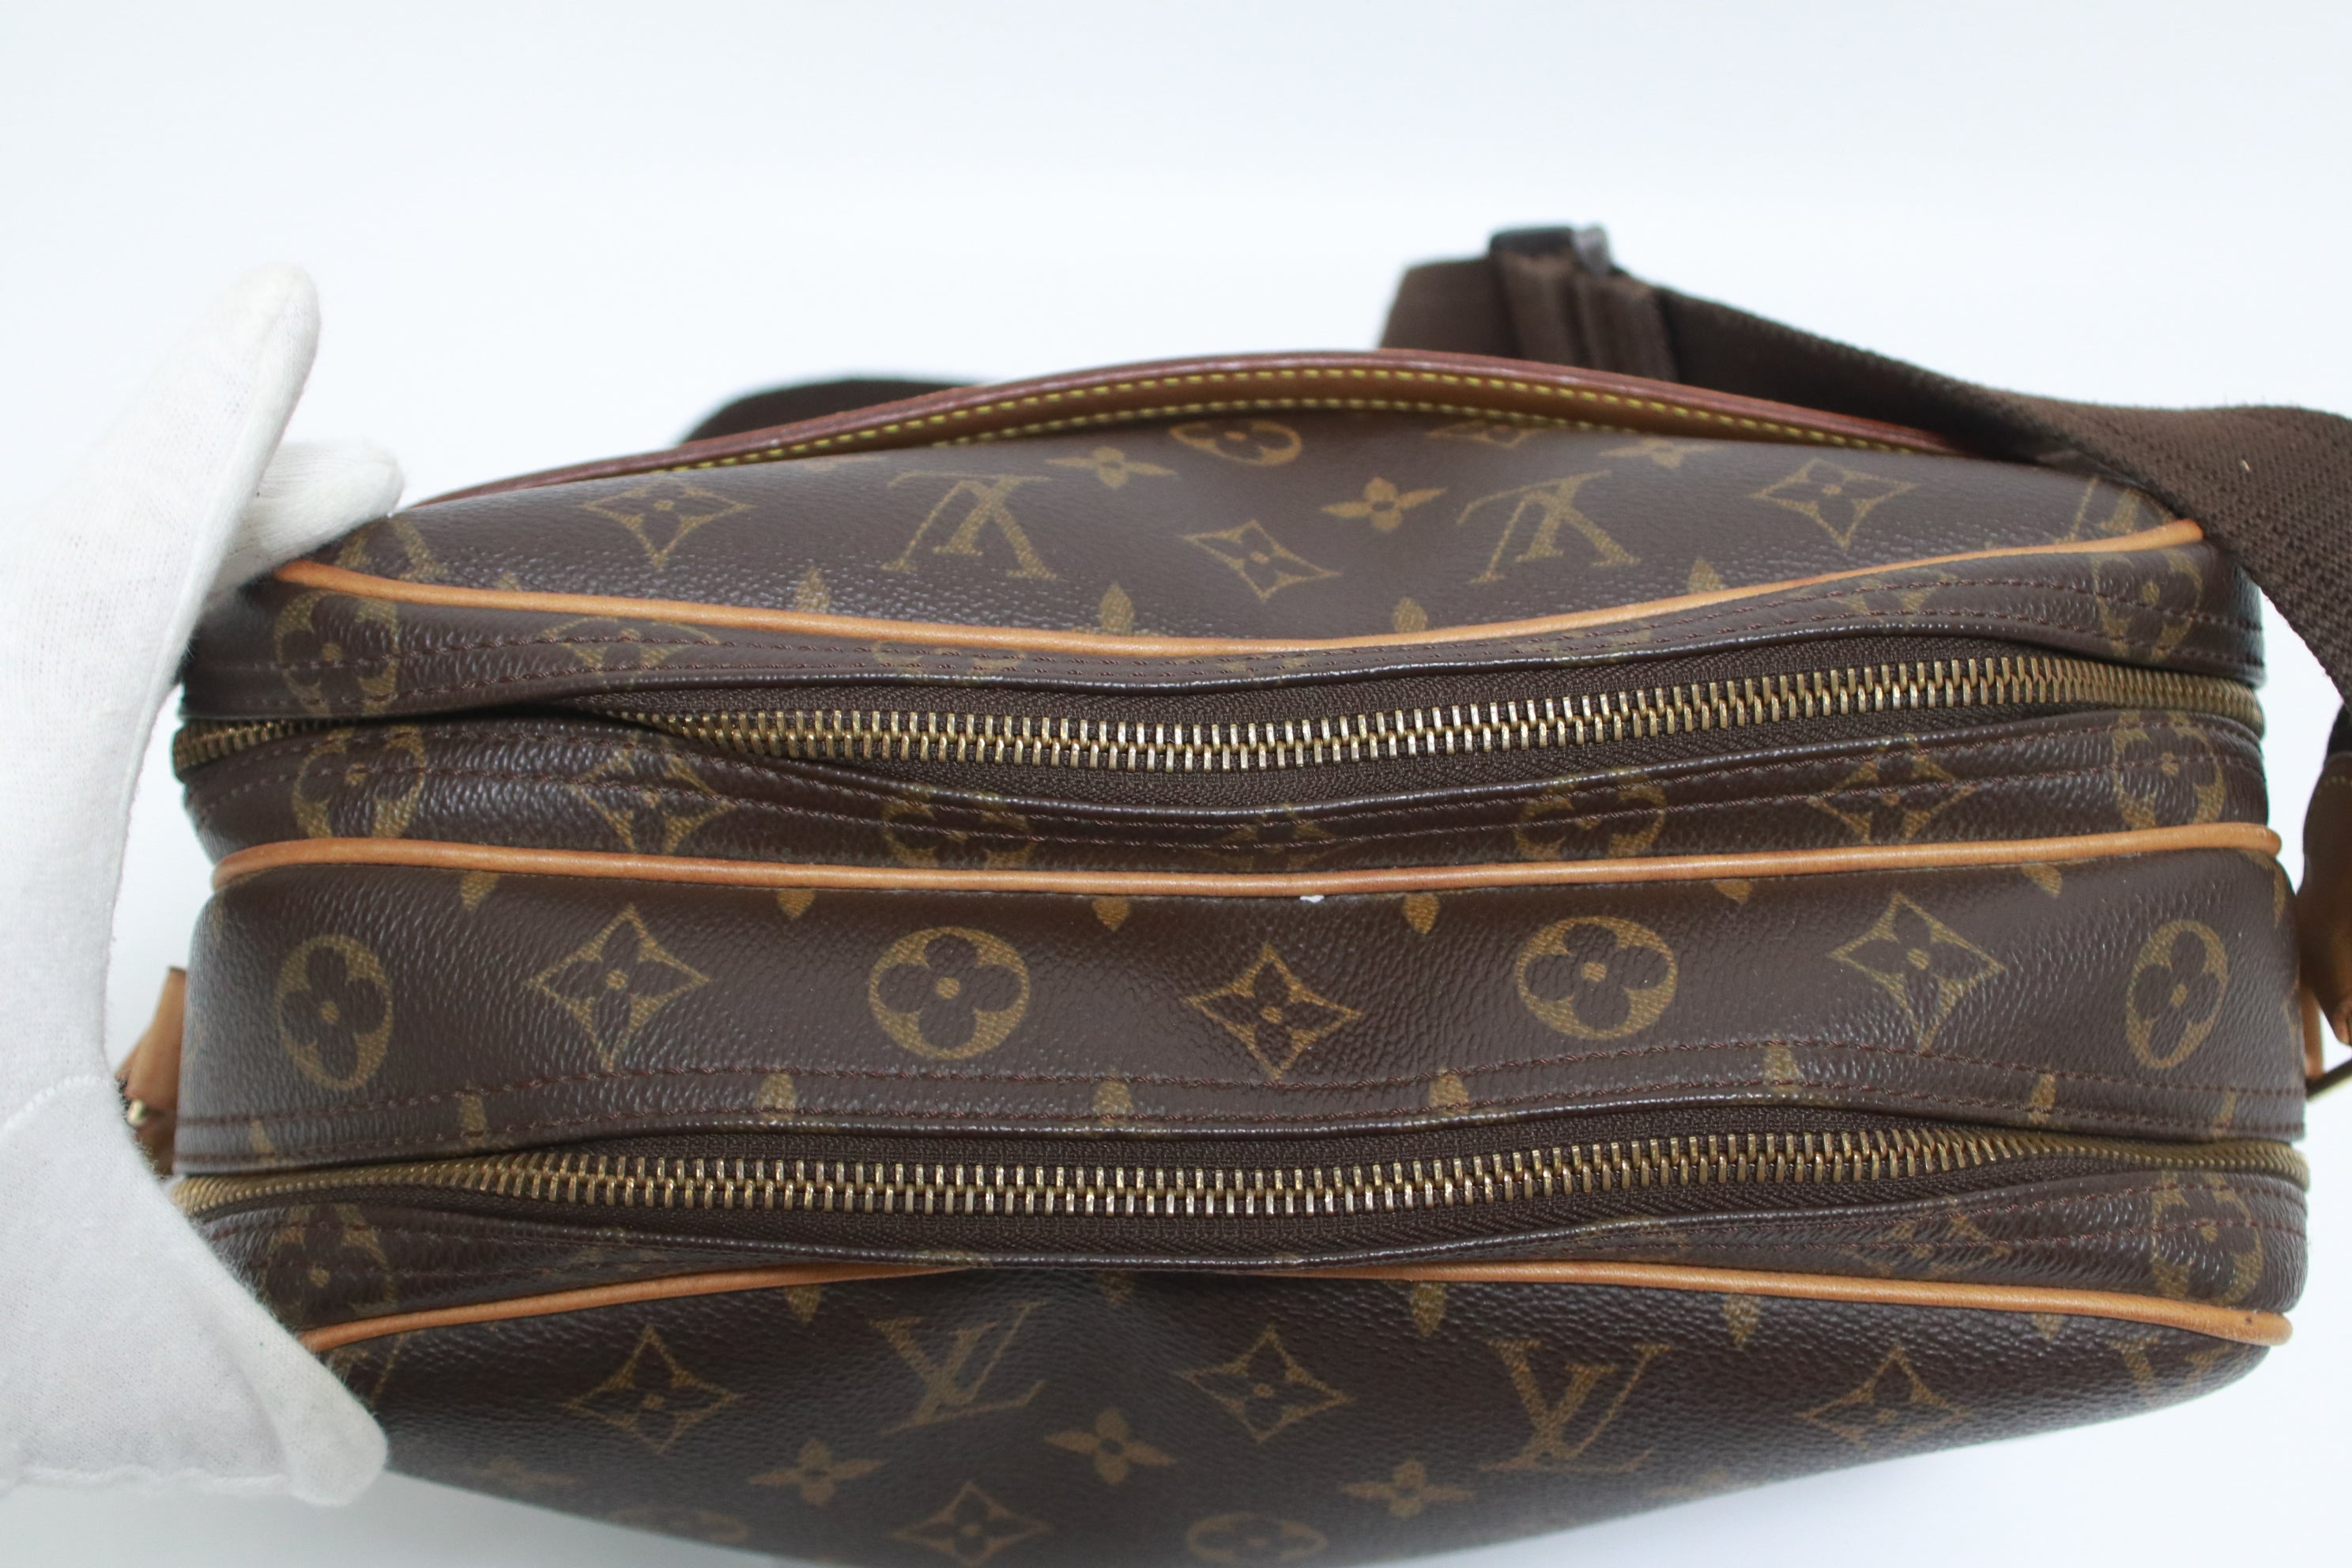 Louis Vuitton Reporter PM Messenger Bag Used (7213)